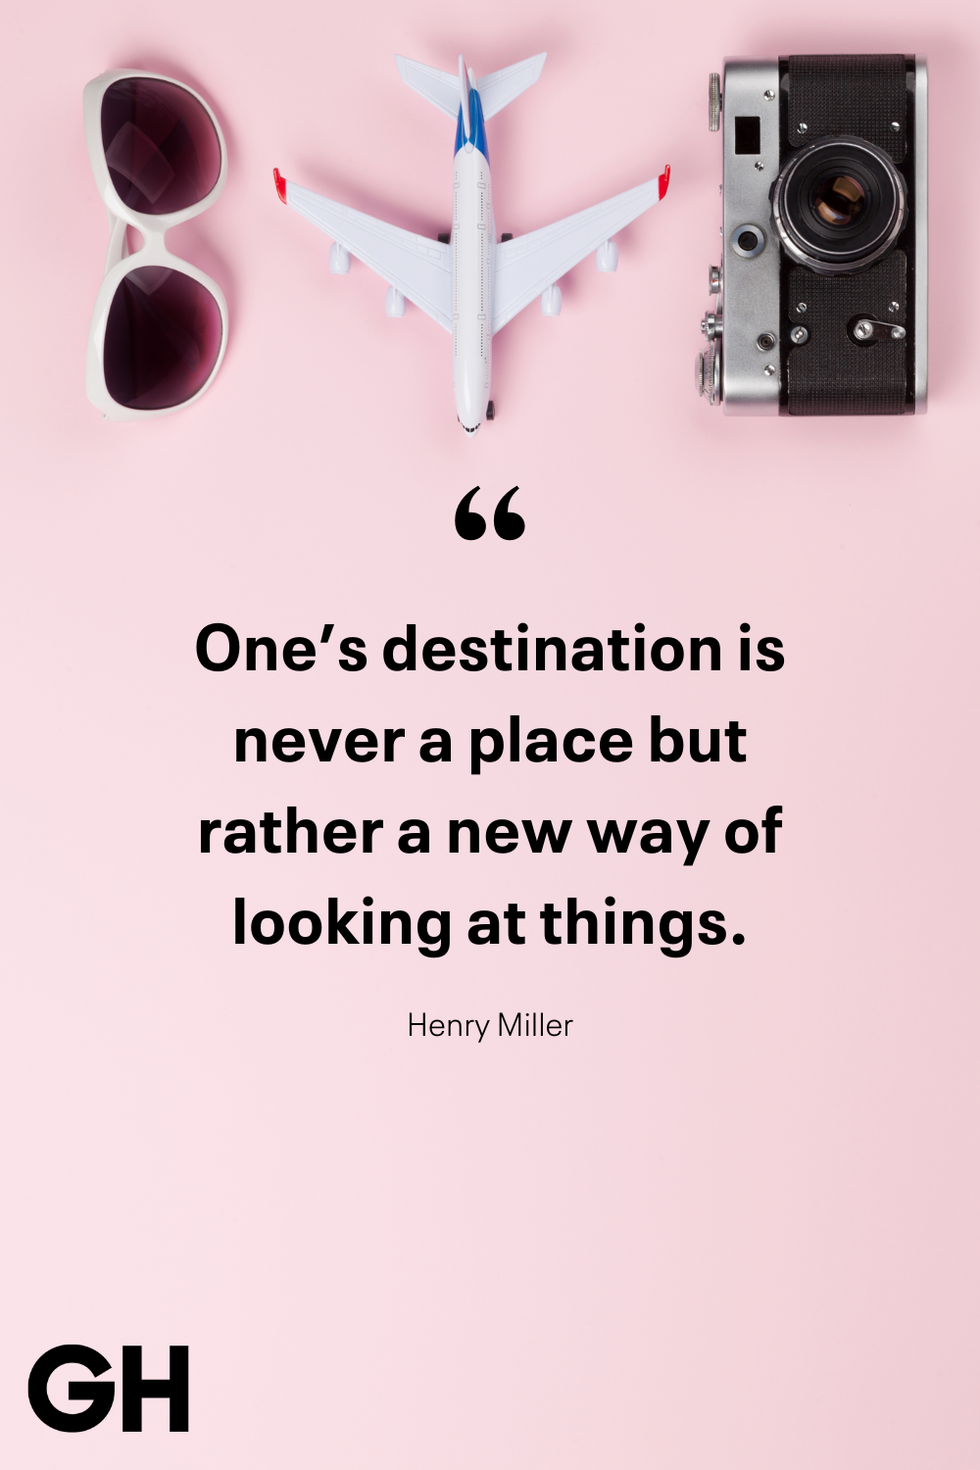 travel quote captions one’s destination is never a place but rather a new way of looking at things henry miller